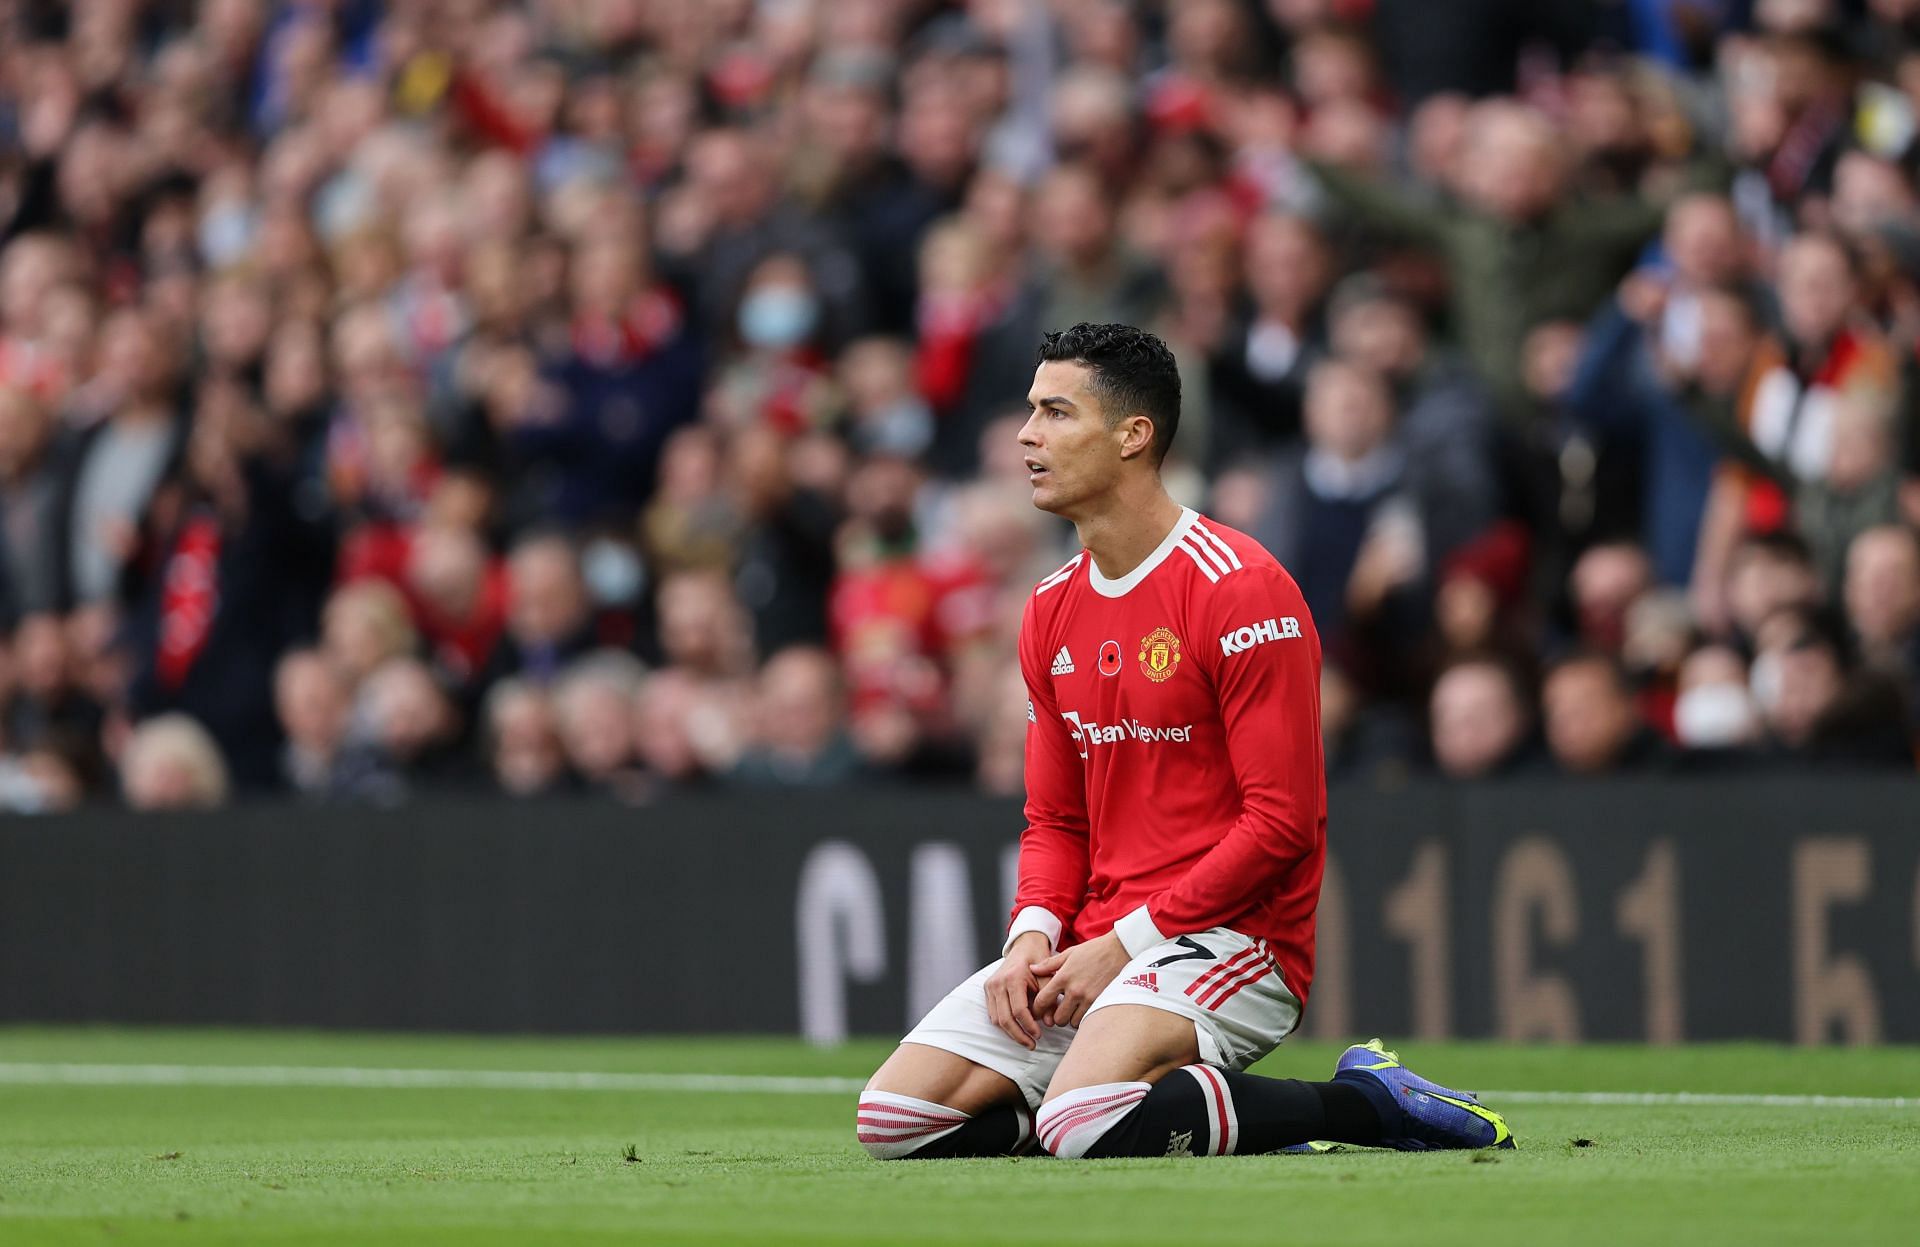 Cristiano Ronaldo is unlikely to retire at Manchester United.